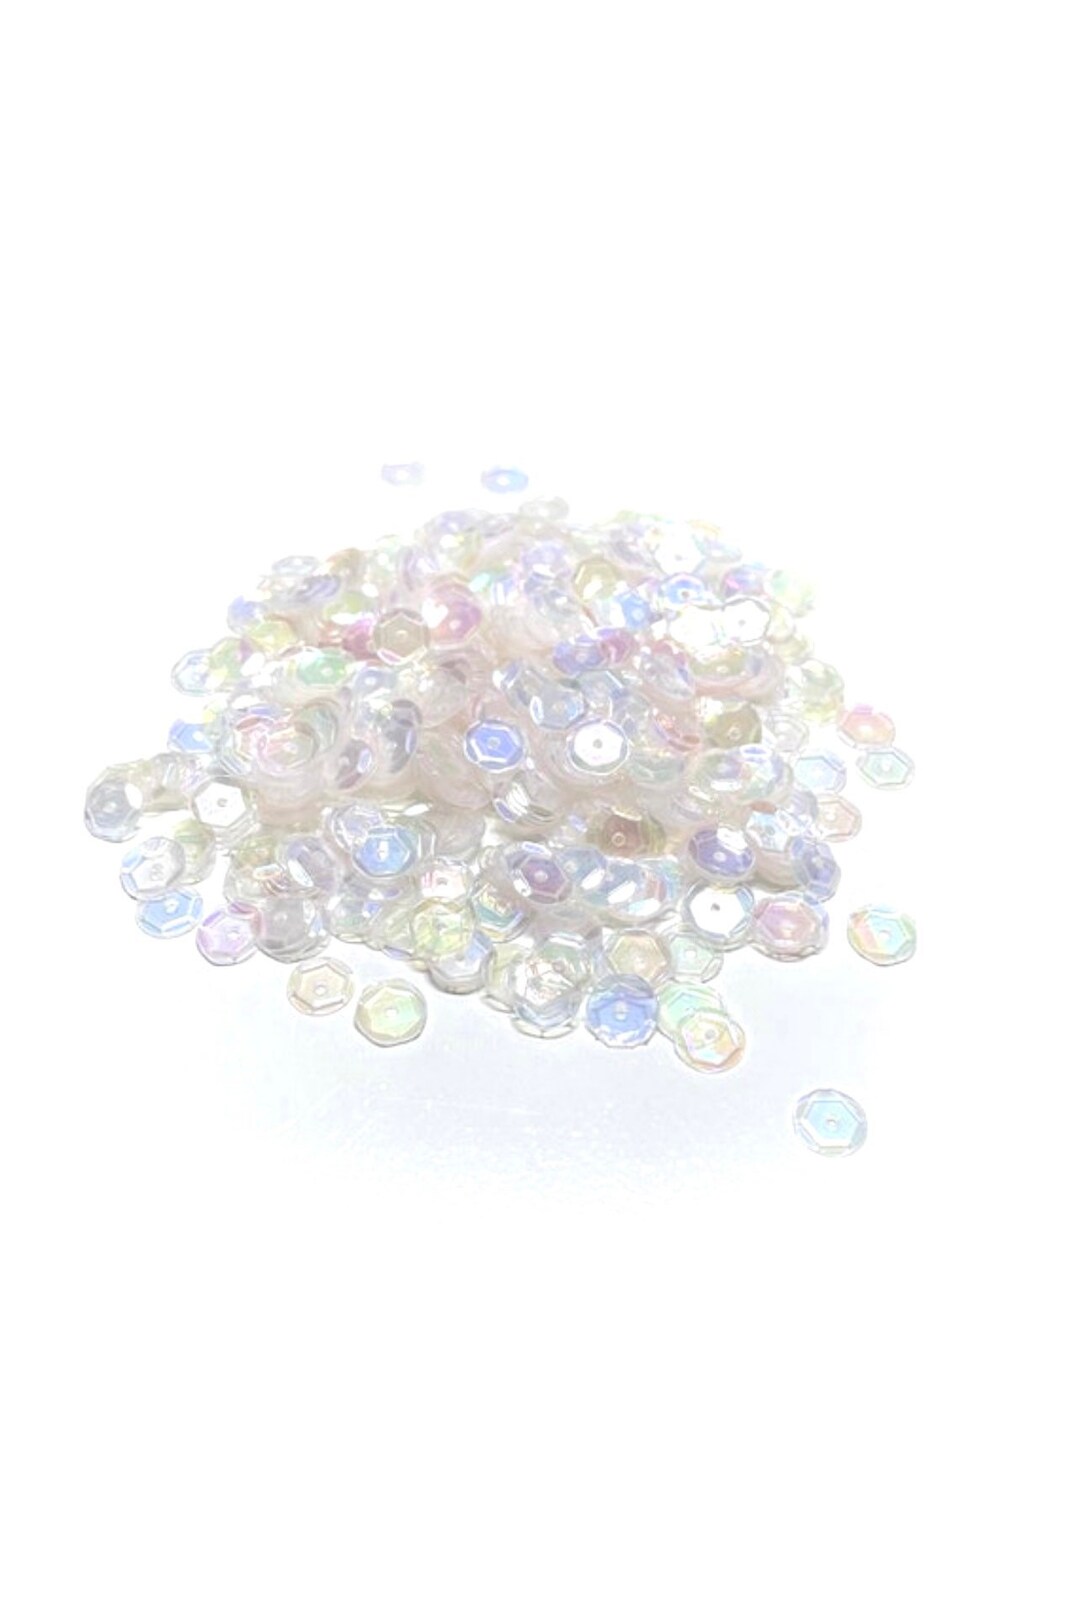 Transparent Iridescent Clear Sequins Multiple Sizes Available - Etsy